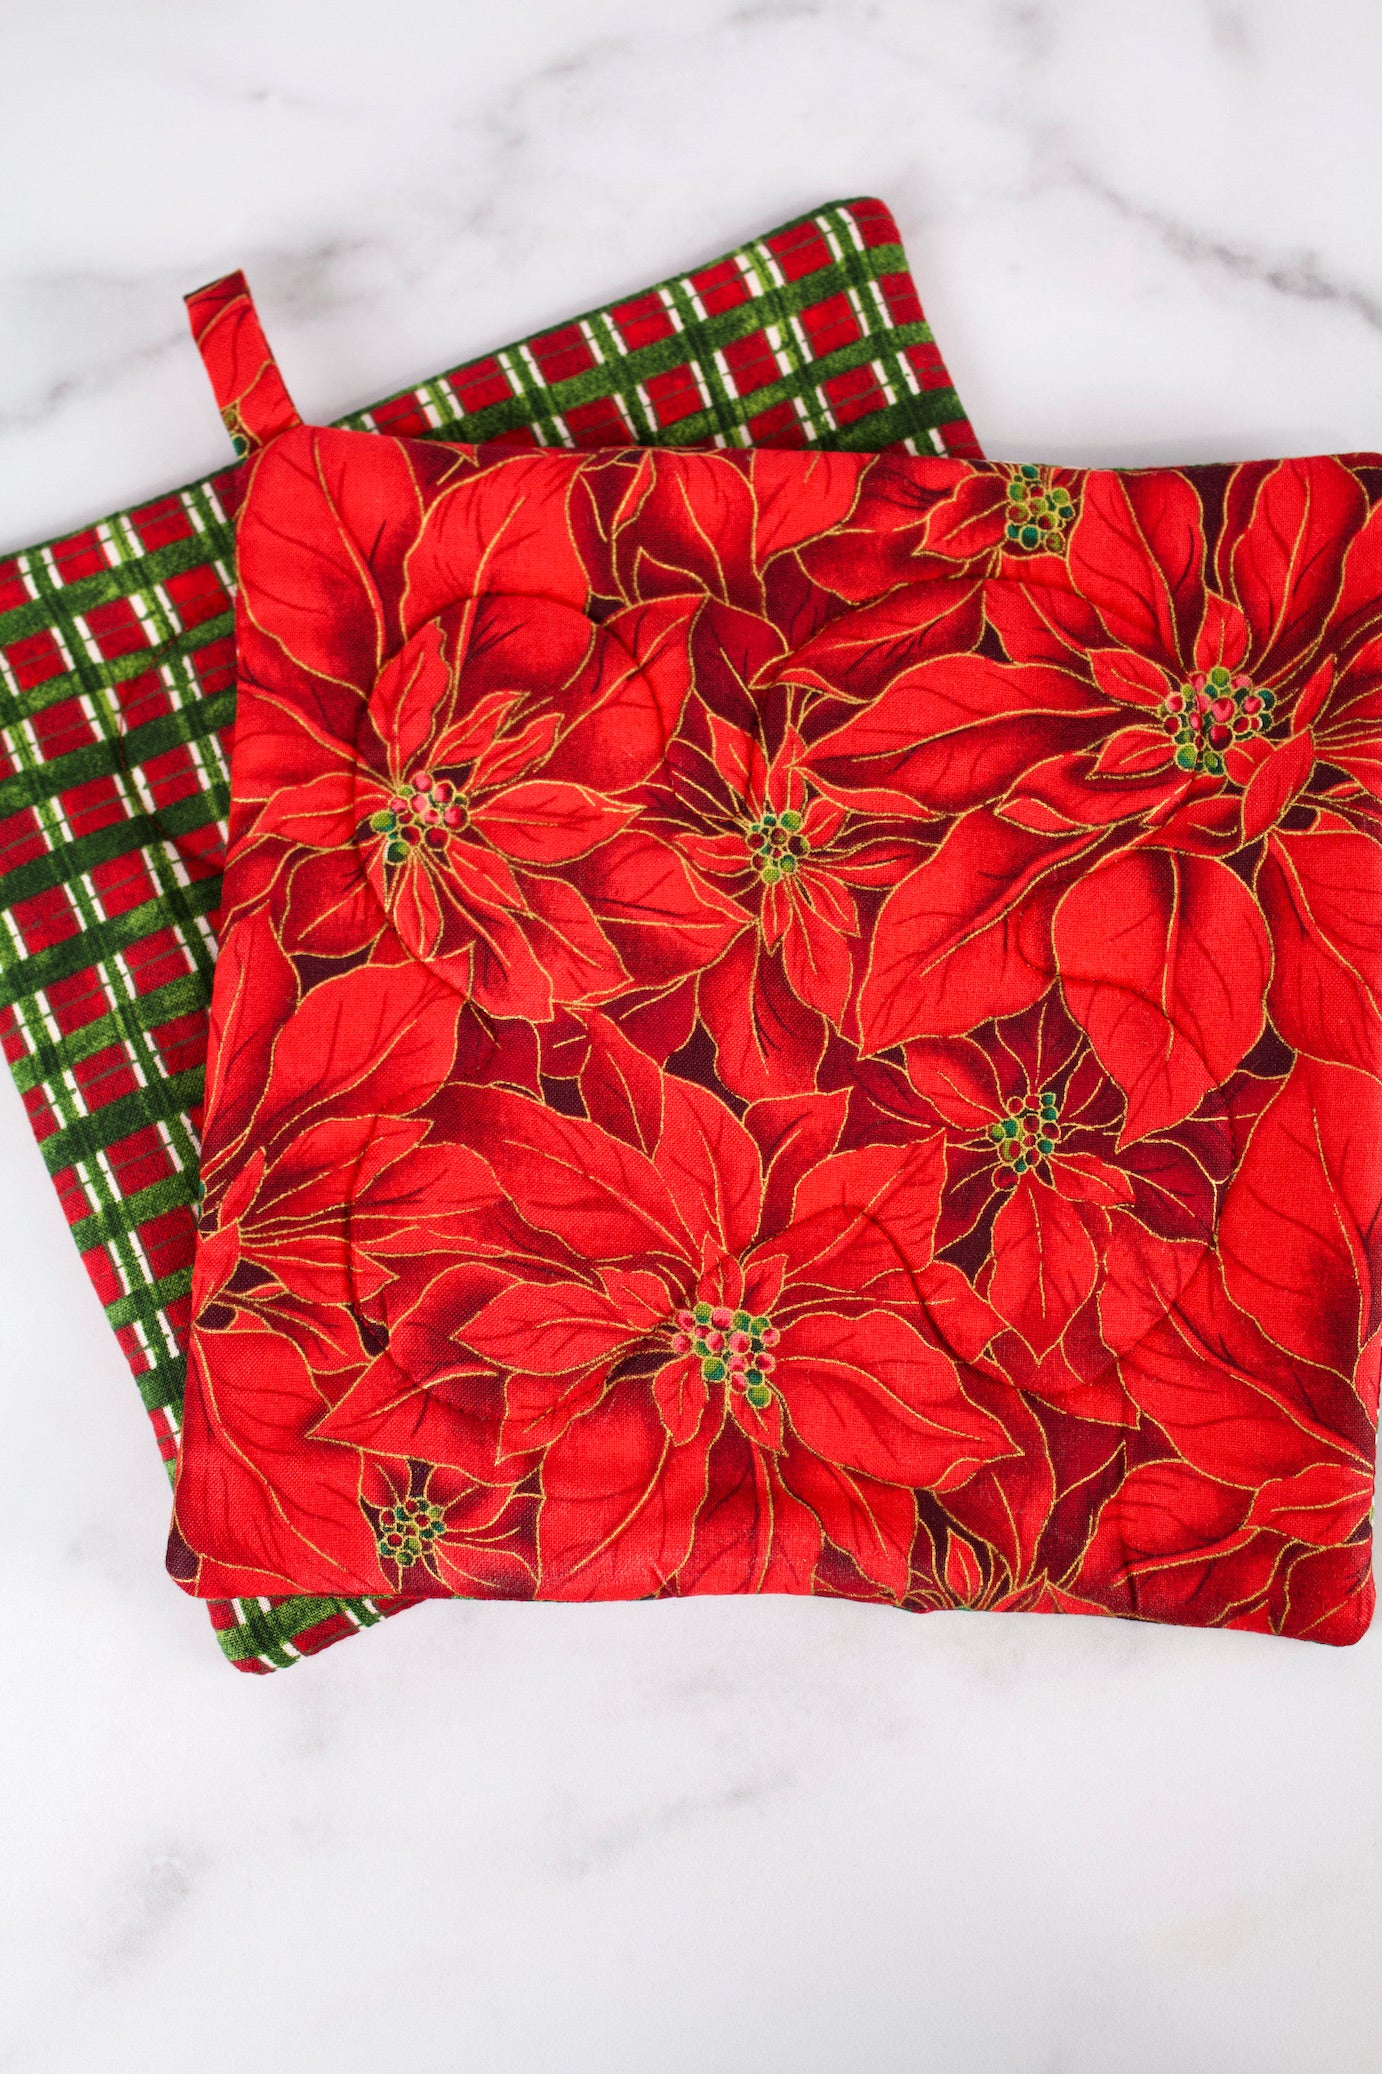 Grace Poinsettia Potholder-The Blue Peony-Category_Pot Holder,Color_Maroon,Color_Red,Department_Kitchen,Pattern_Floral,Size_Traditional (Square),Theme_Christmas,Theme_Winter